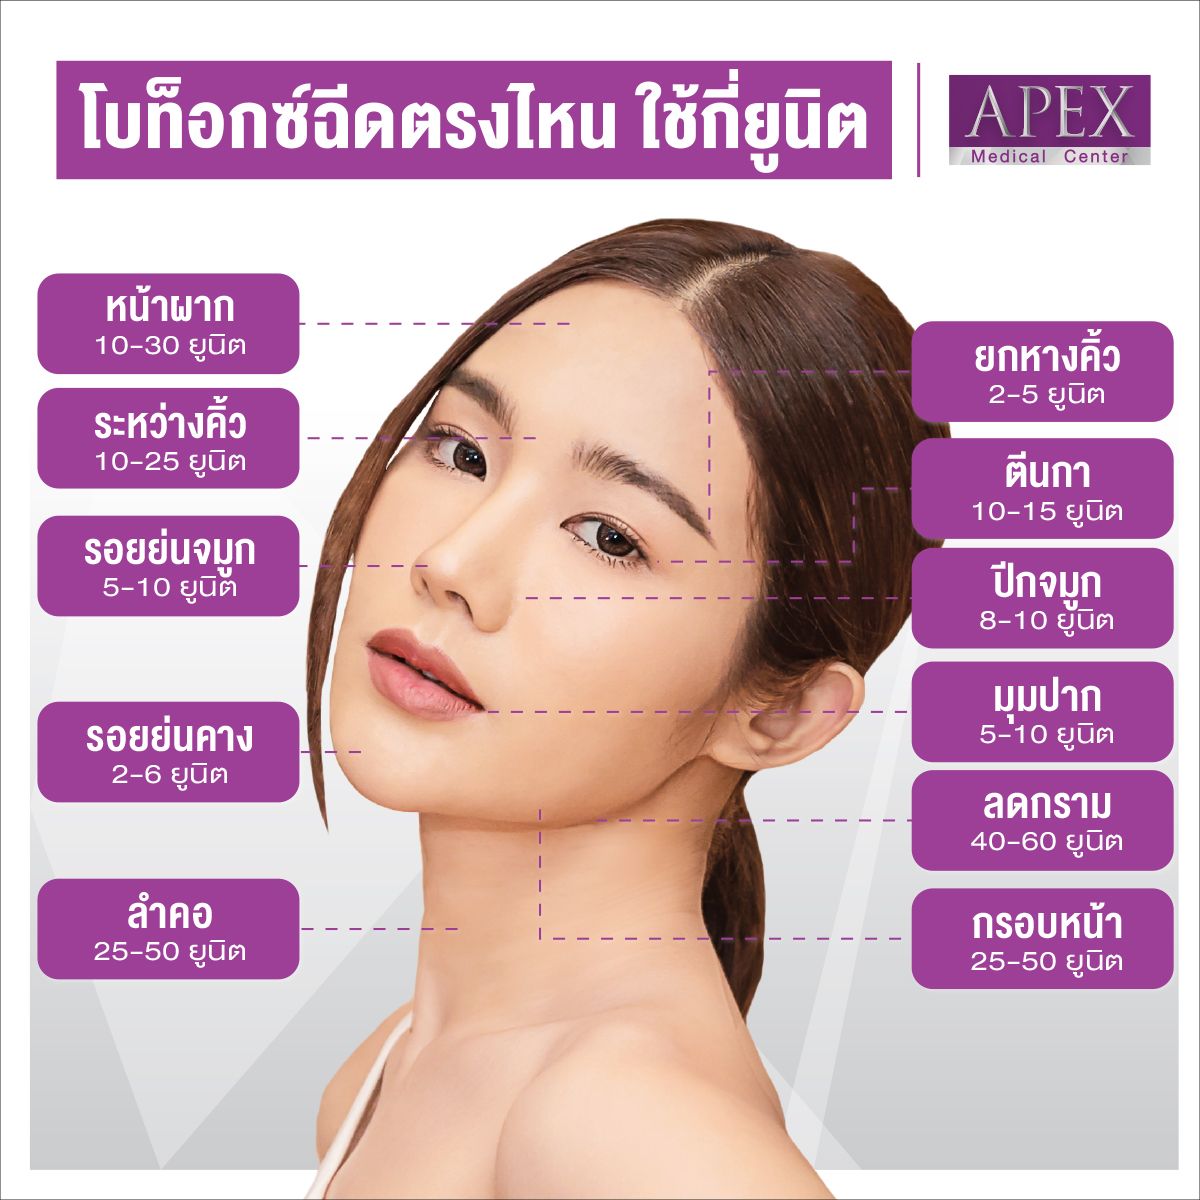 Reasons to inject Botox is Botox injections are shots that use a toxin to prevent a muscle from moving for a limited time.